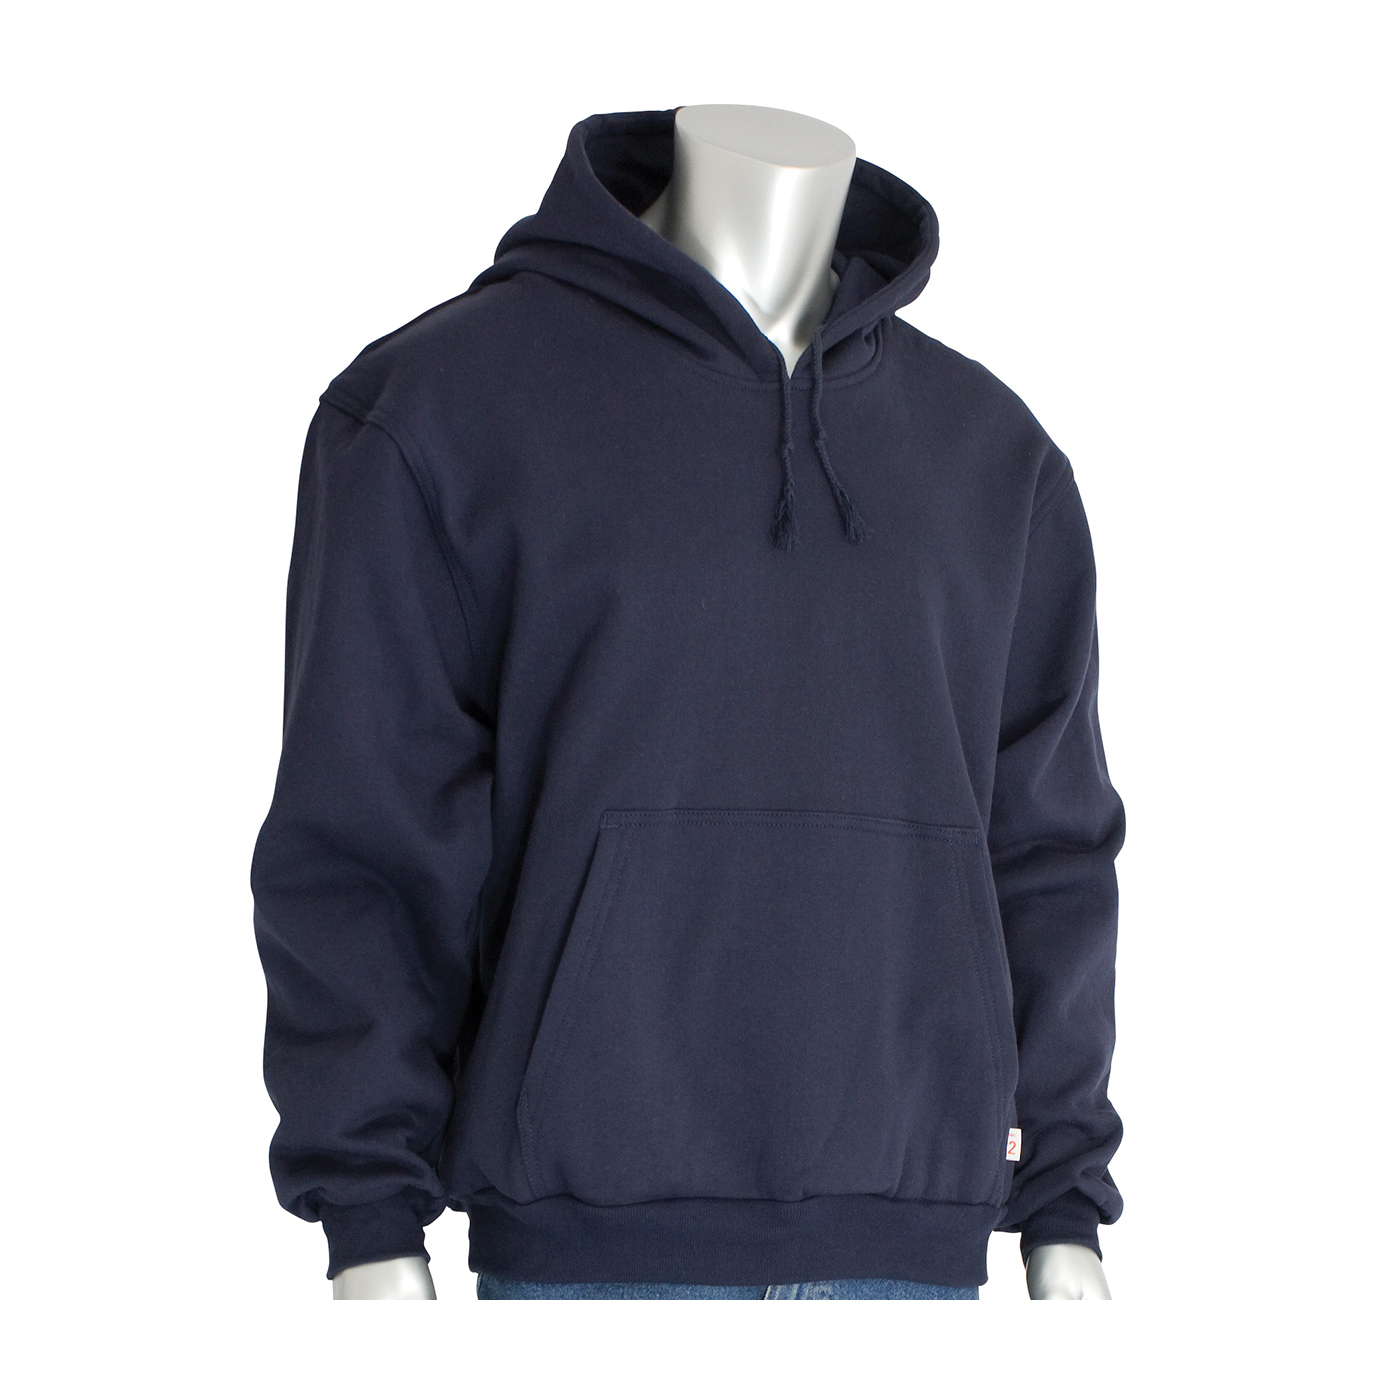 PIP® 385-FRPH-NV/M Polartec® 385-FRPH Arc and Flame Resistant Sweatshirt, M, Navy, FR Fleece Knit/100% Cotton, 30 in Regular, 31 in Tall L